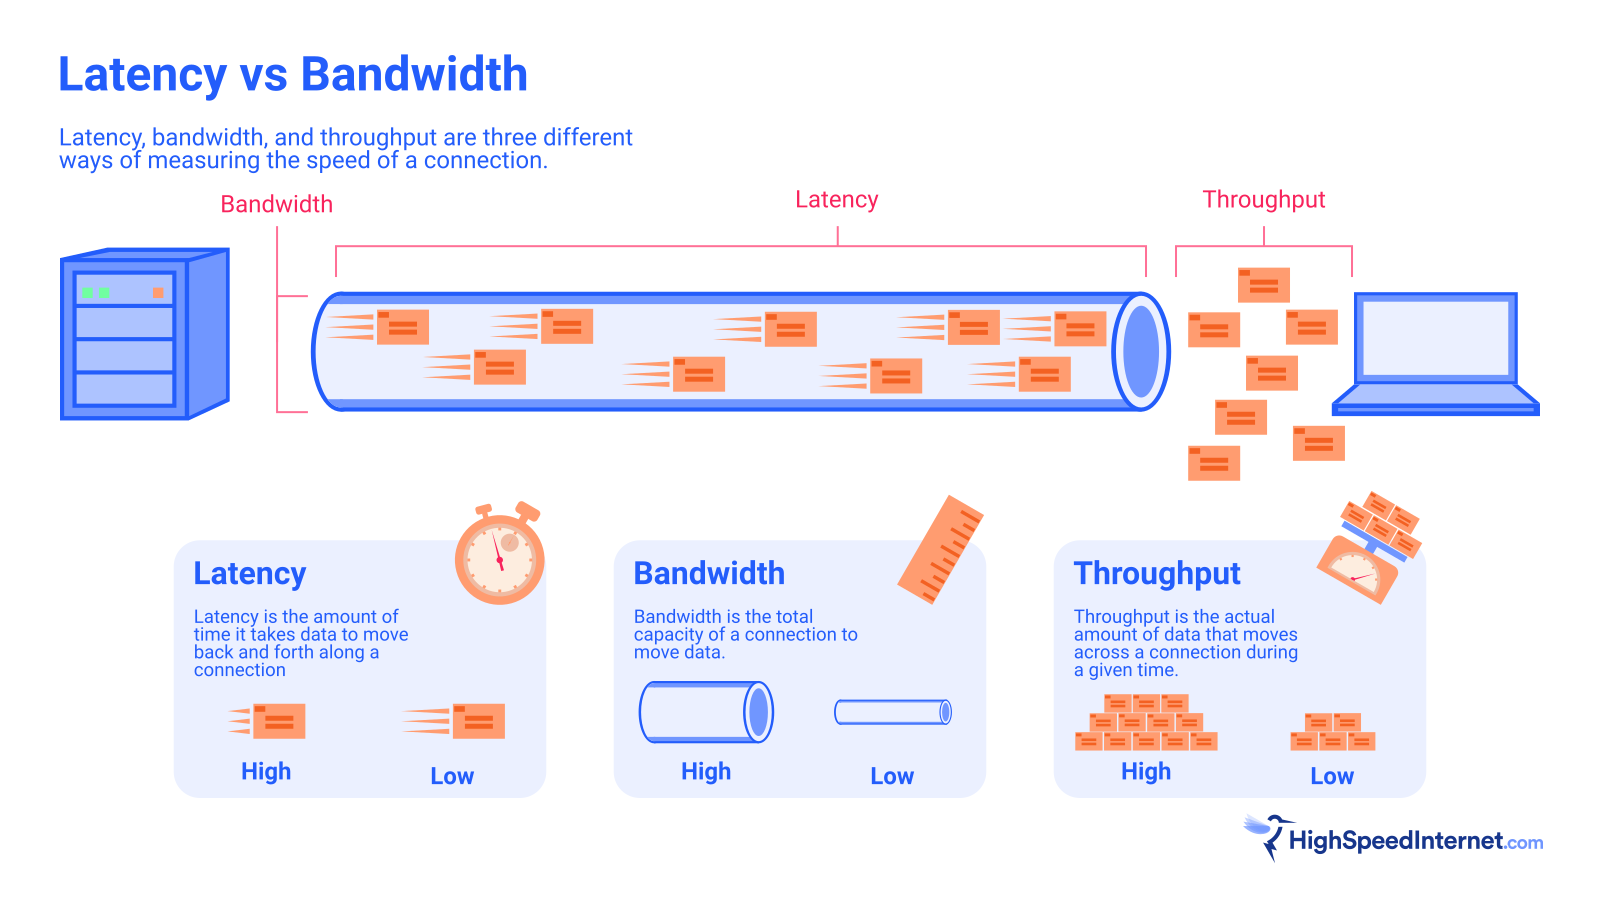 An Illustration showing the difference between latency, bandwidth, and throughput.